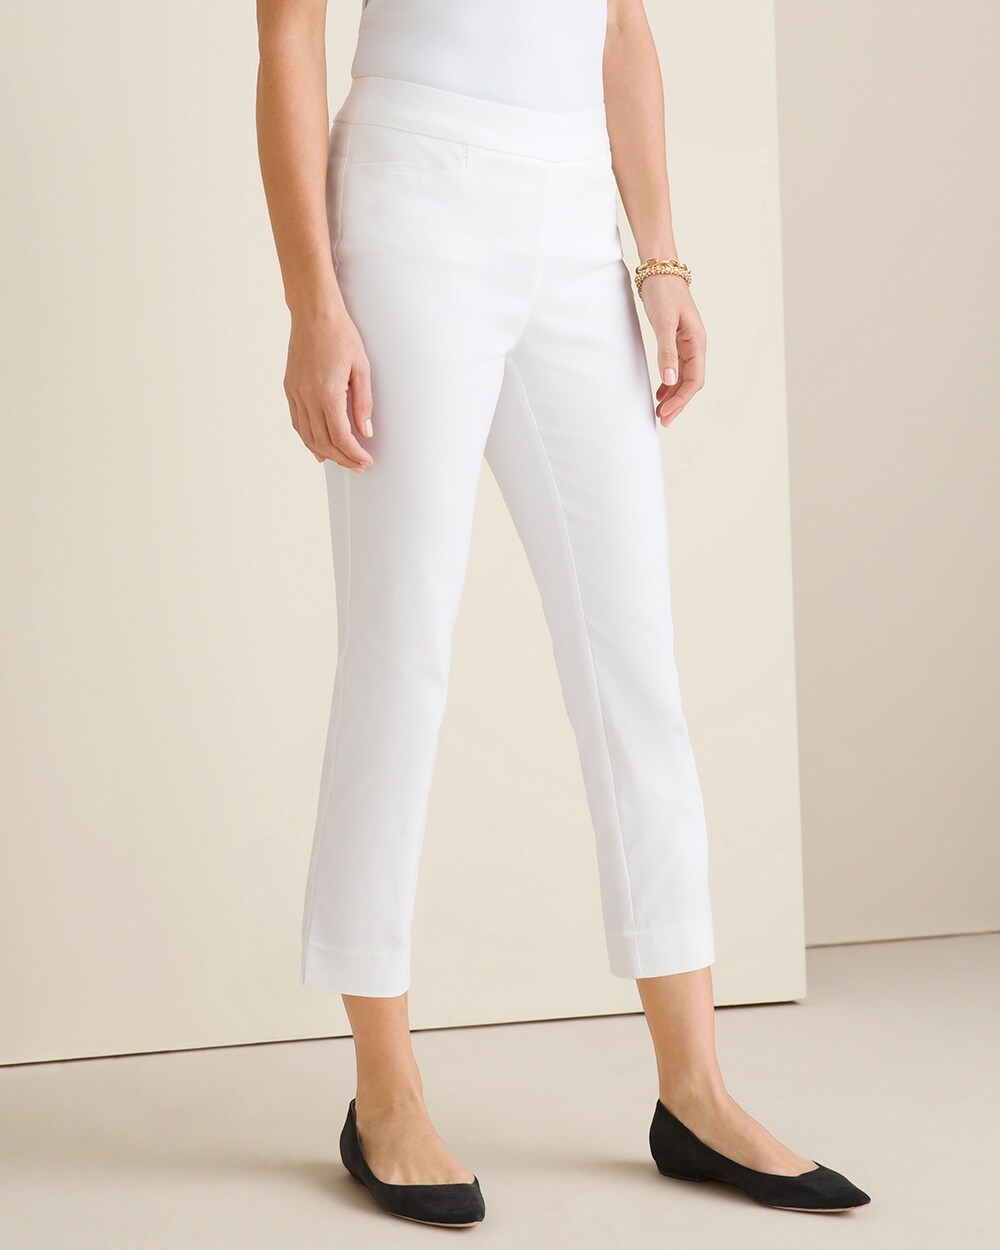 NWT Chico's Size 0.5 S 6 x 27 So Slimming Brigitte Optic White Ankle Pants  $89